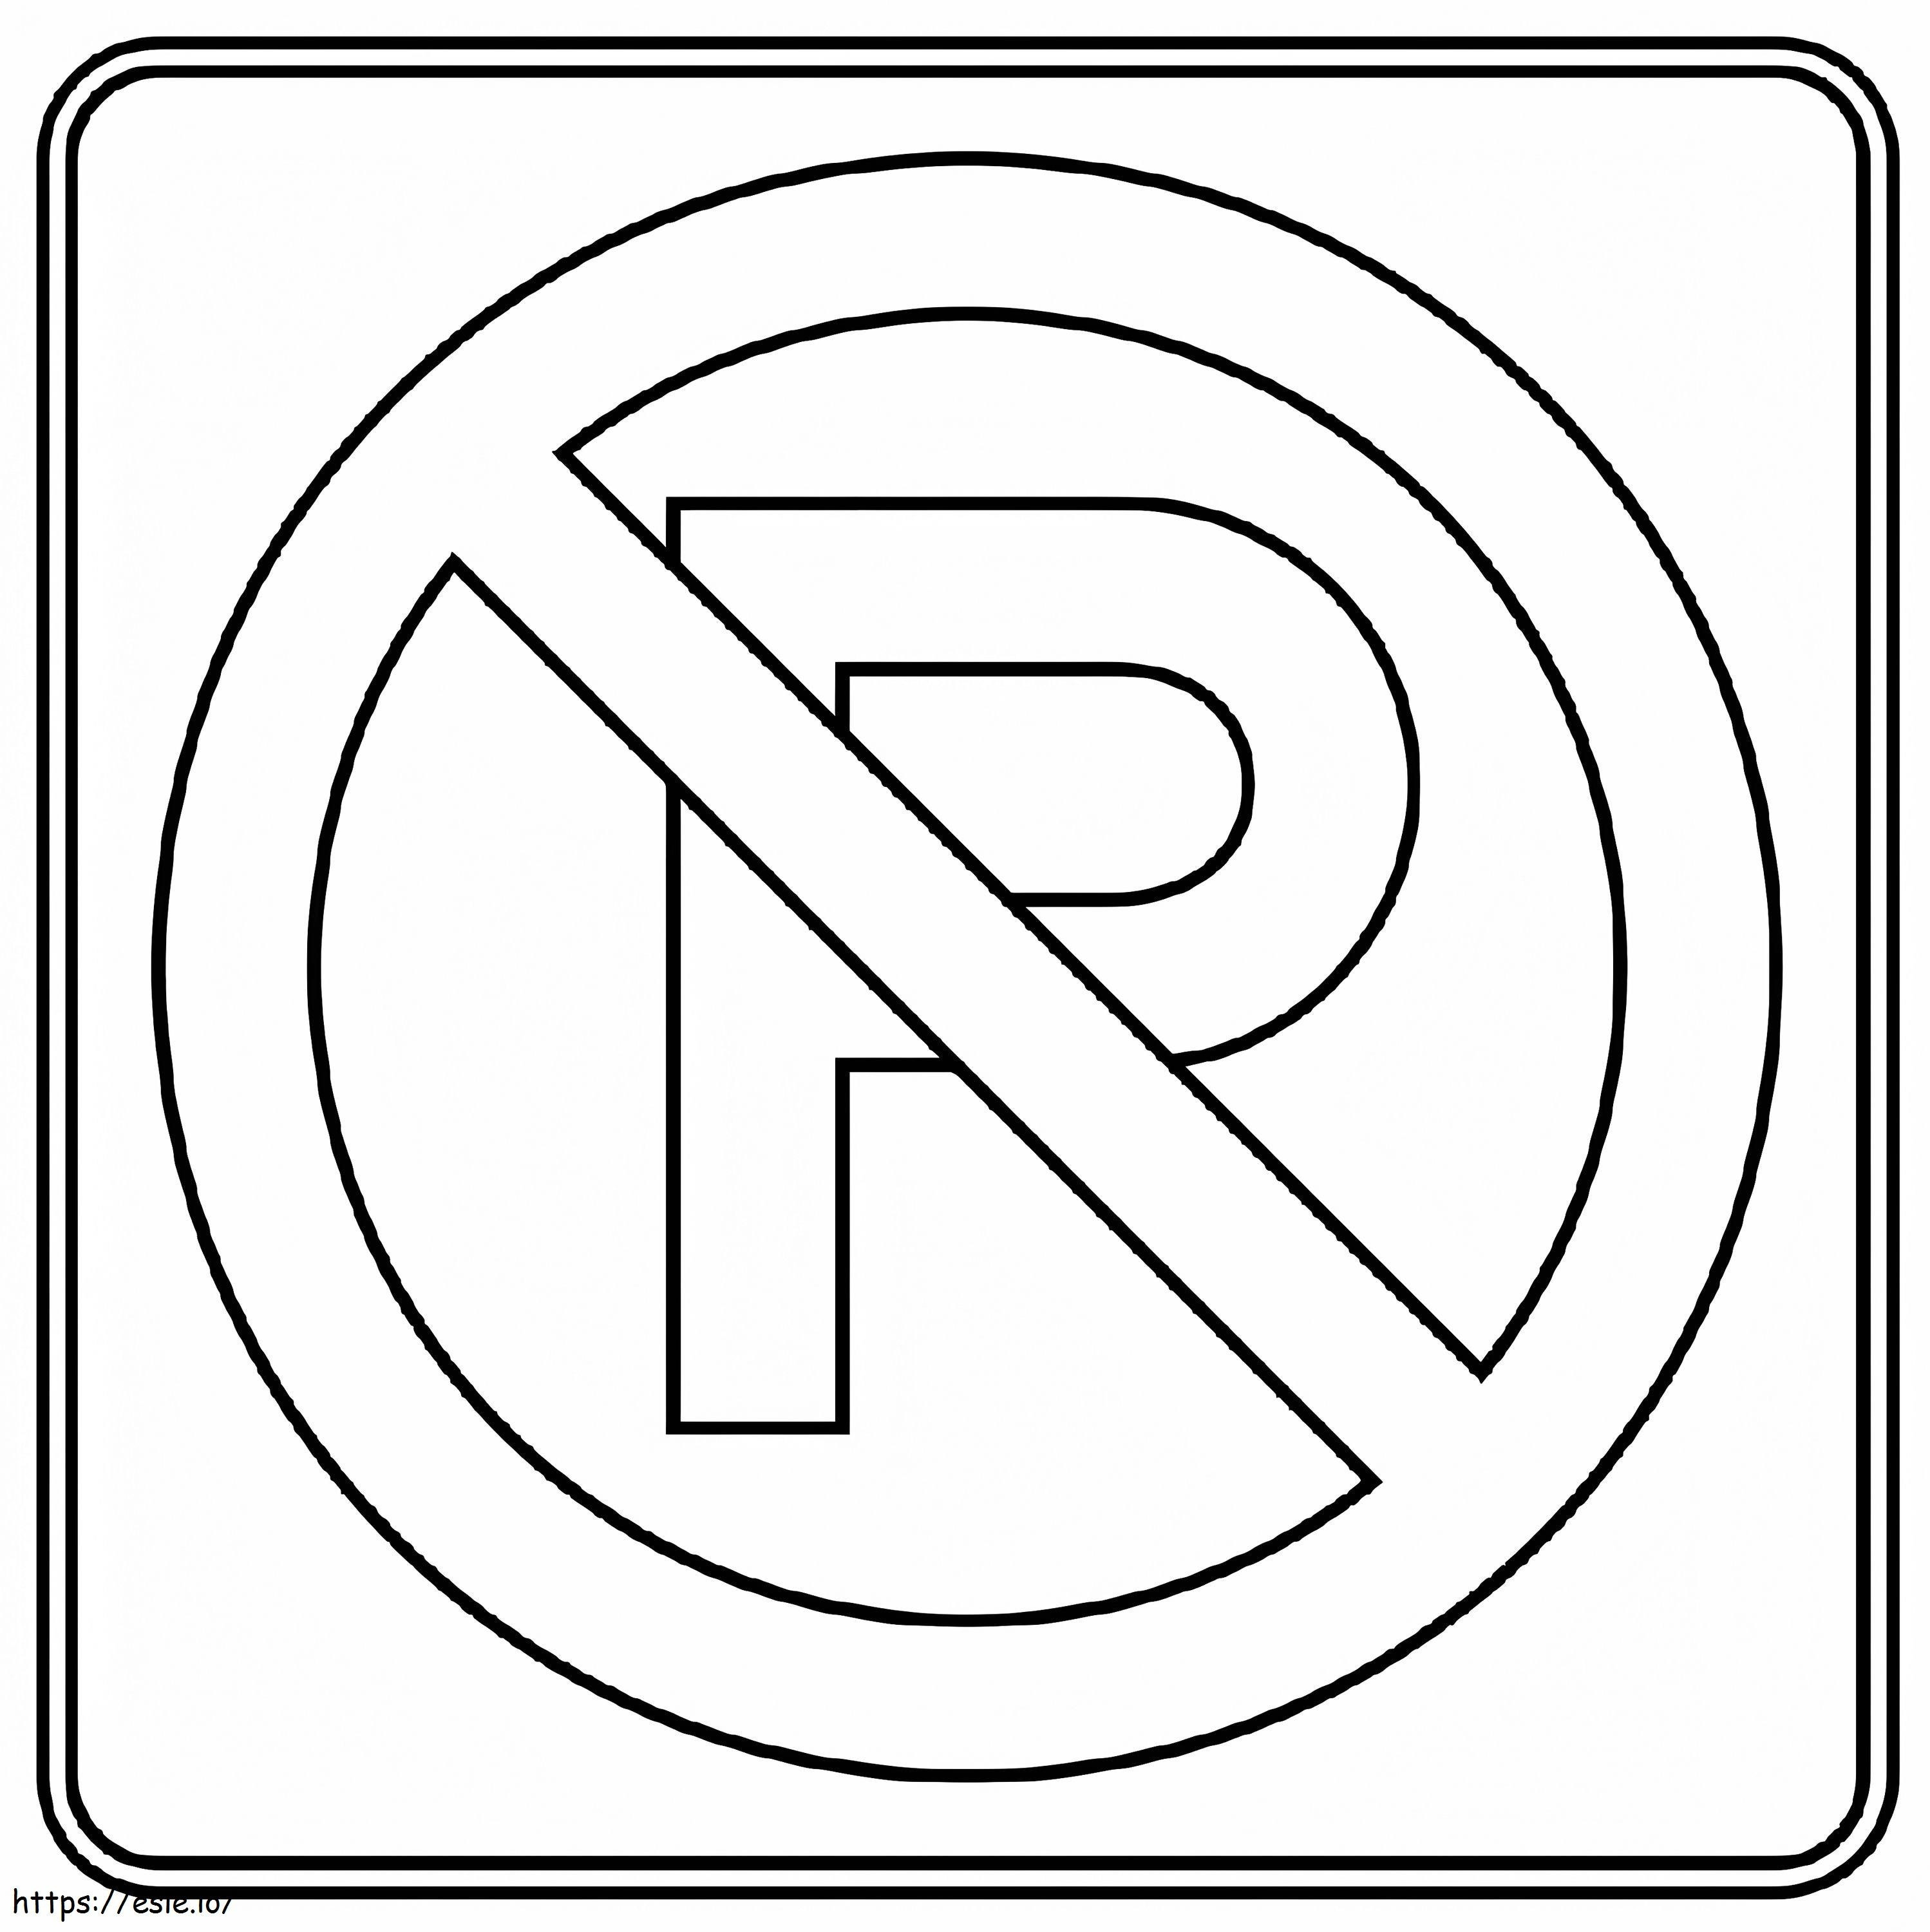 No Parking coloring page